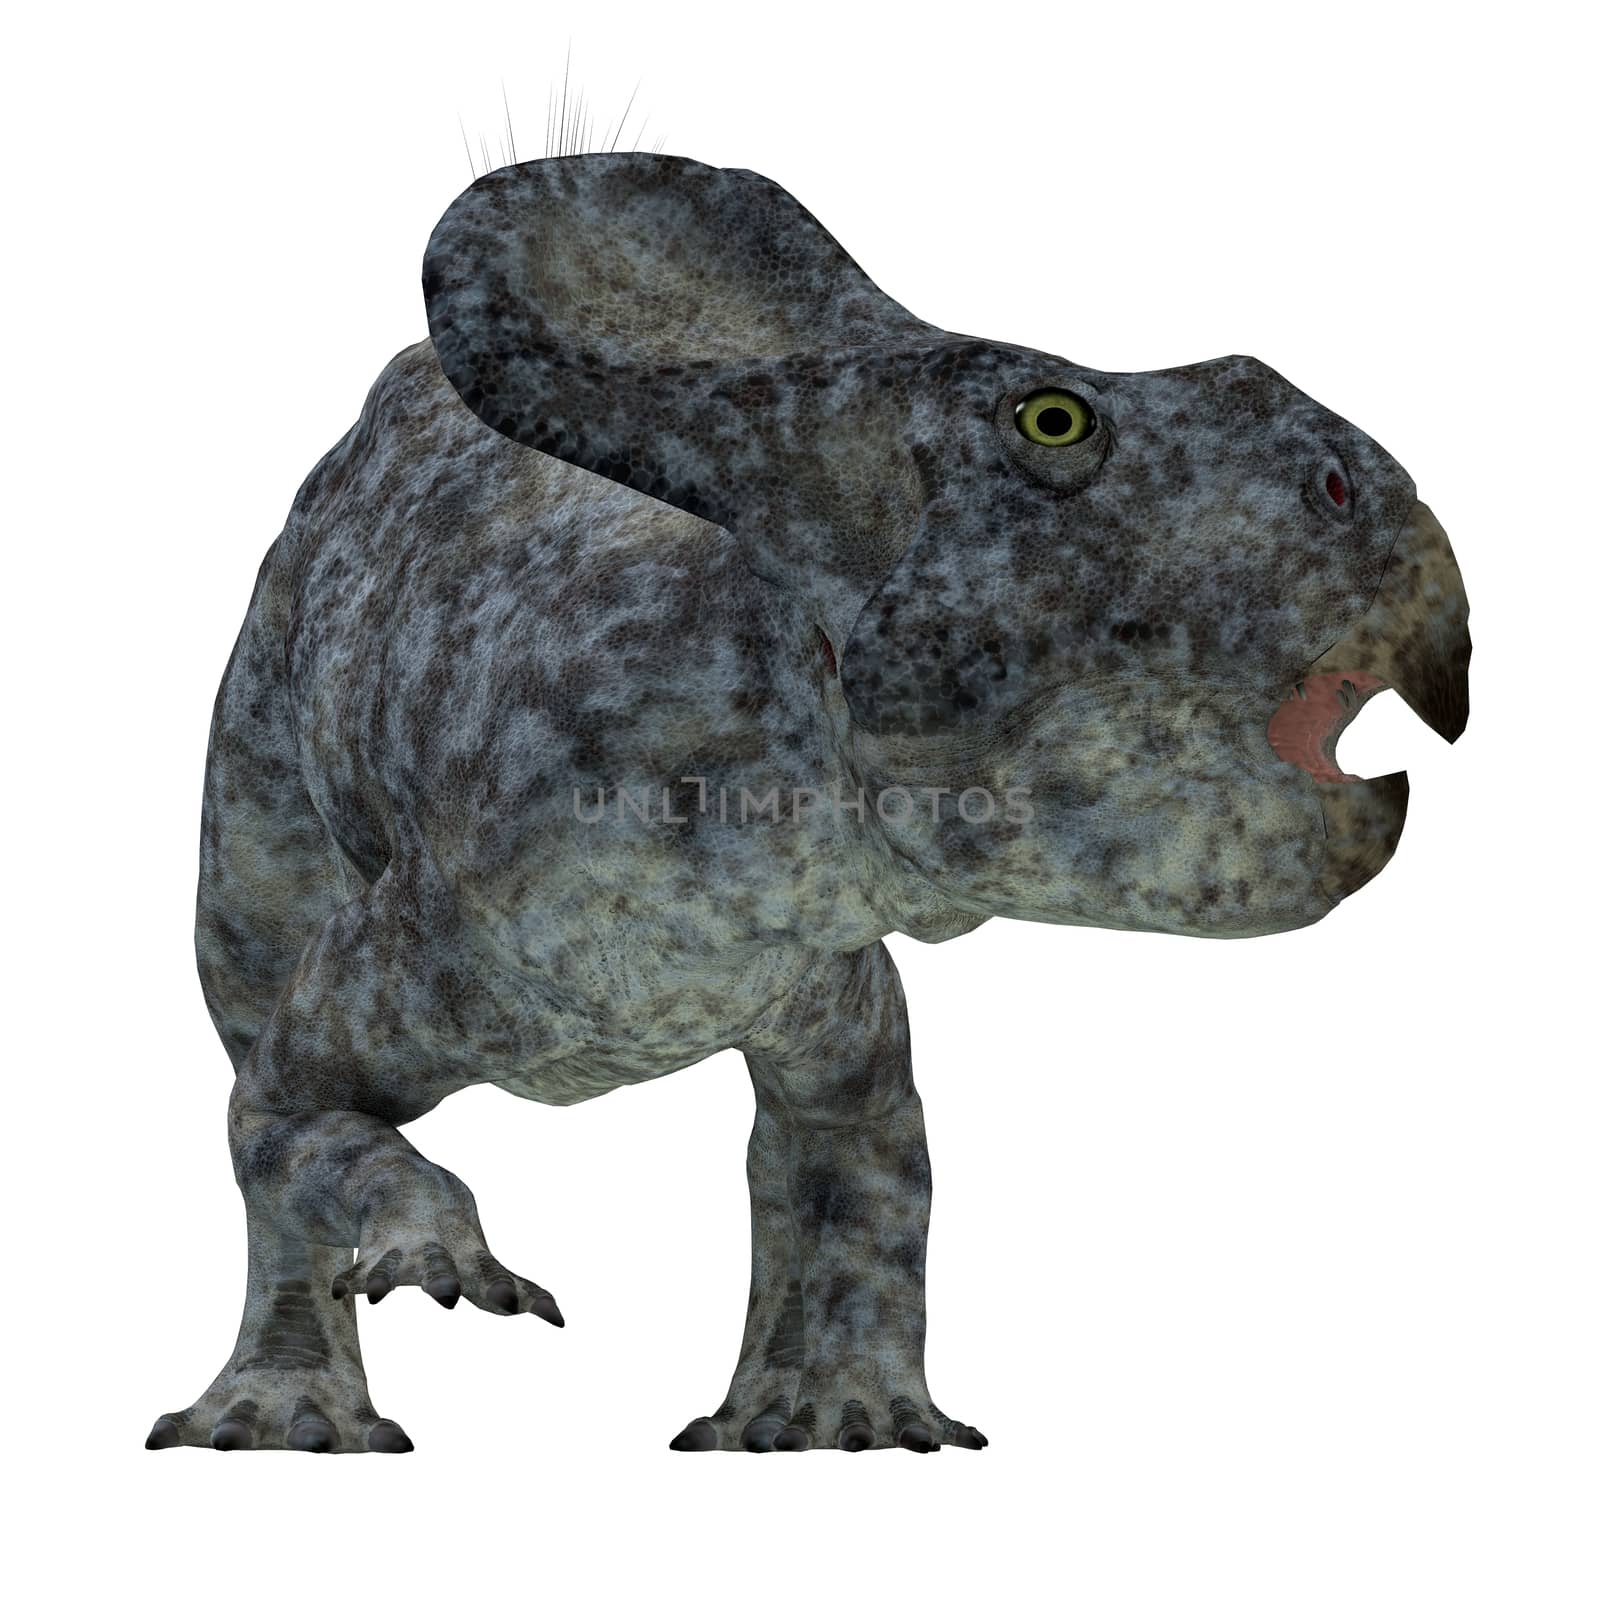 Protoceratops was a herbivorous Ceratopsian dinosaur that lived in Mongolia in the Cretaceous Period.